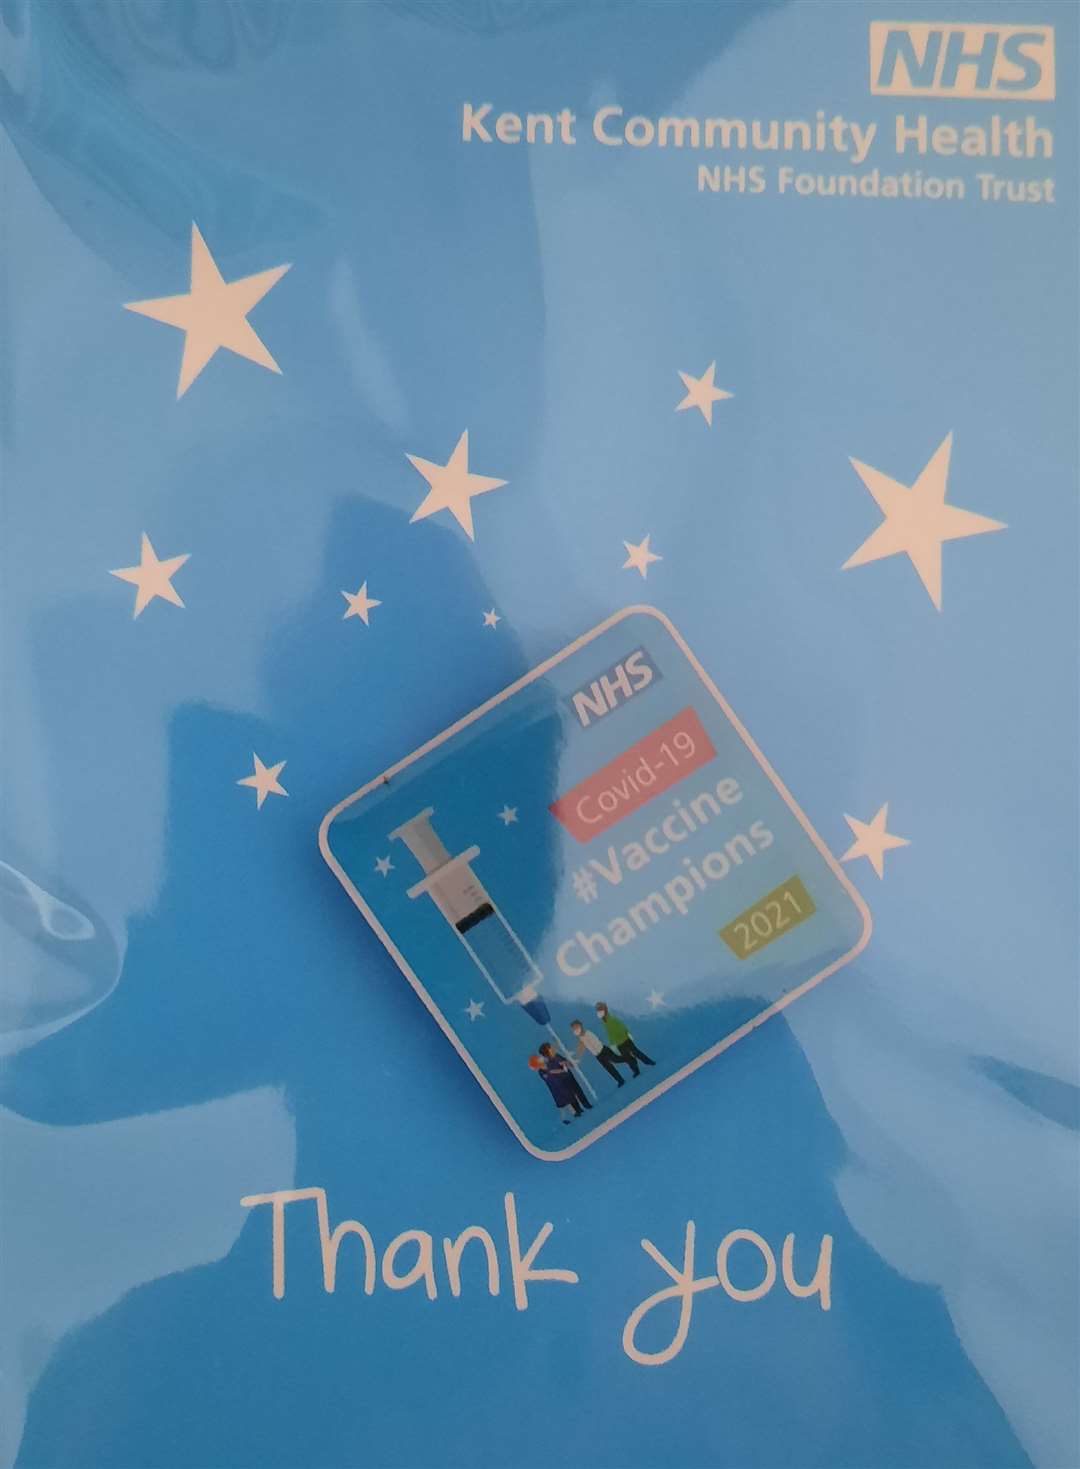 Pin badges and thank you letters were given to KCHFT staff by bosses